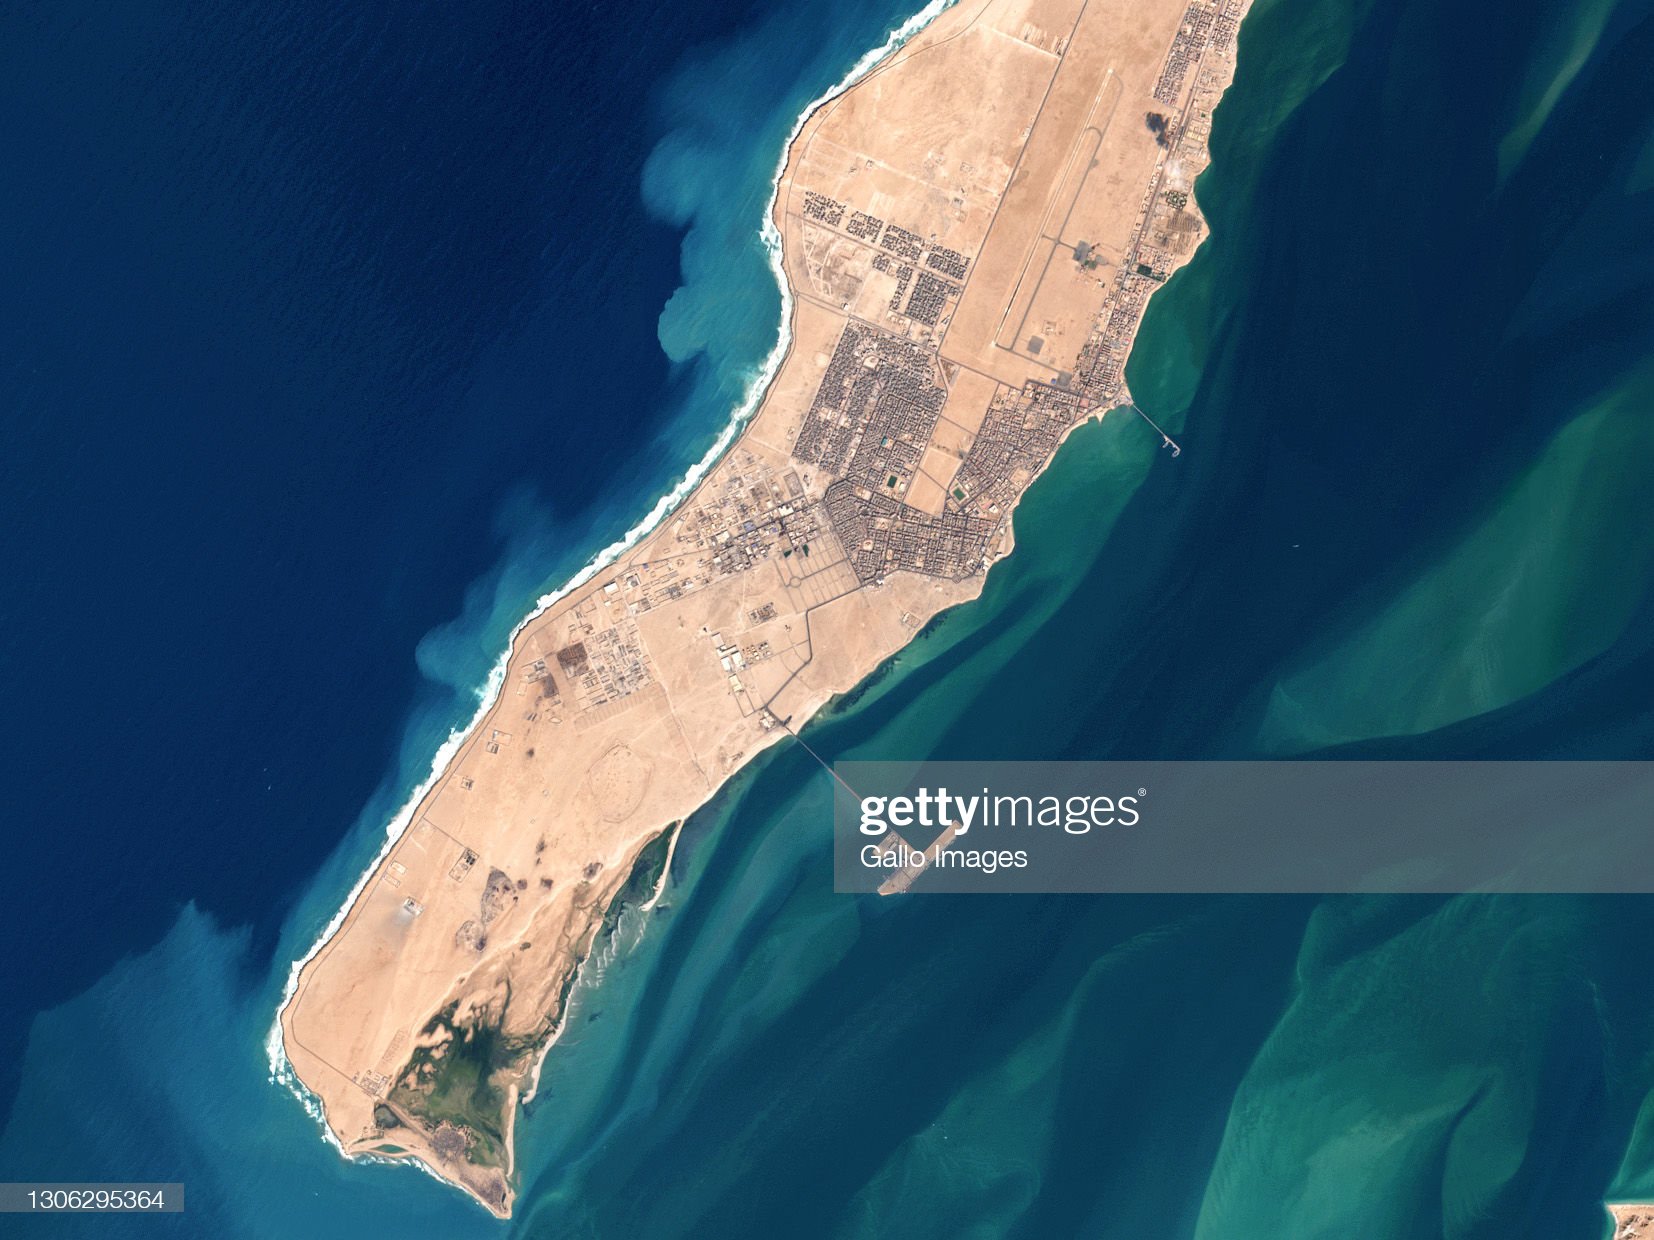 dakhla-in-moroccoadministered-western-sahara-picture-id1306295364